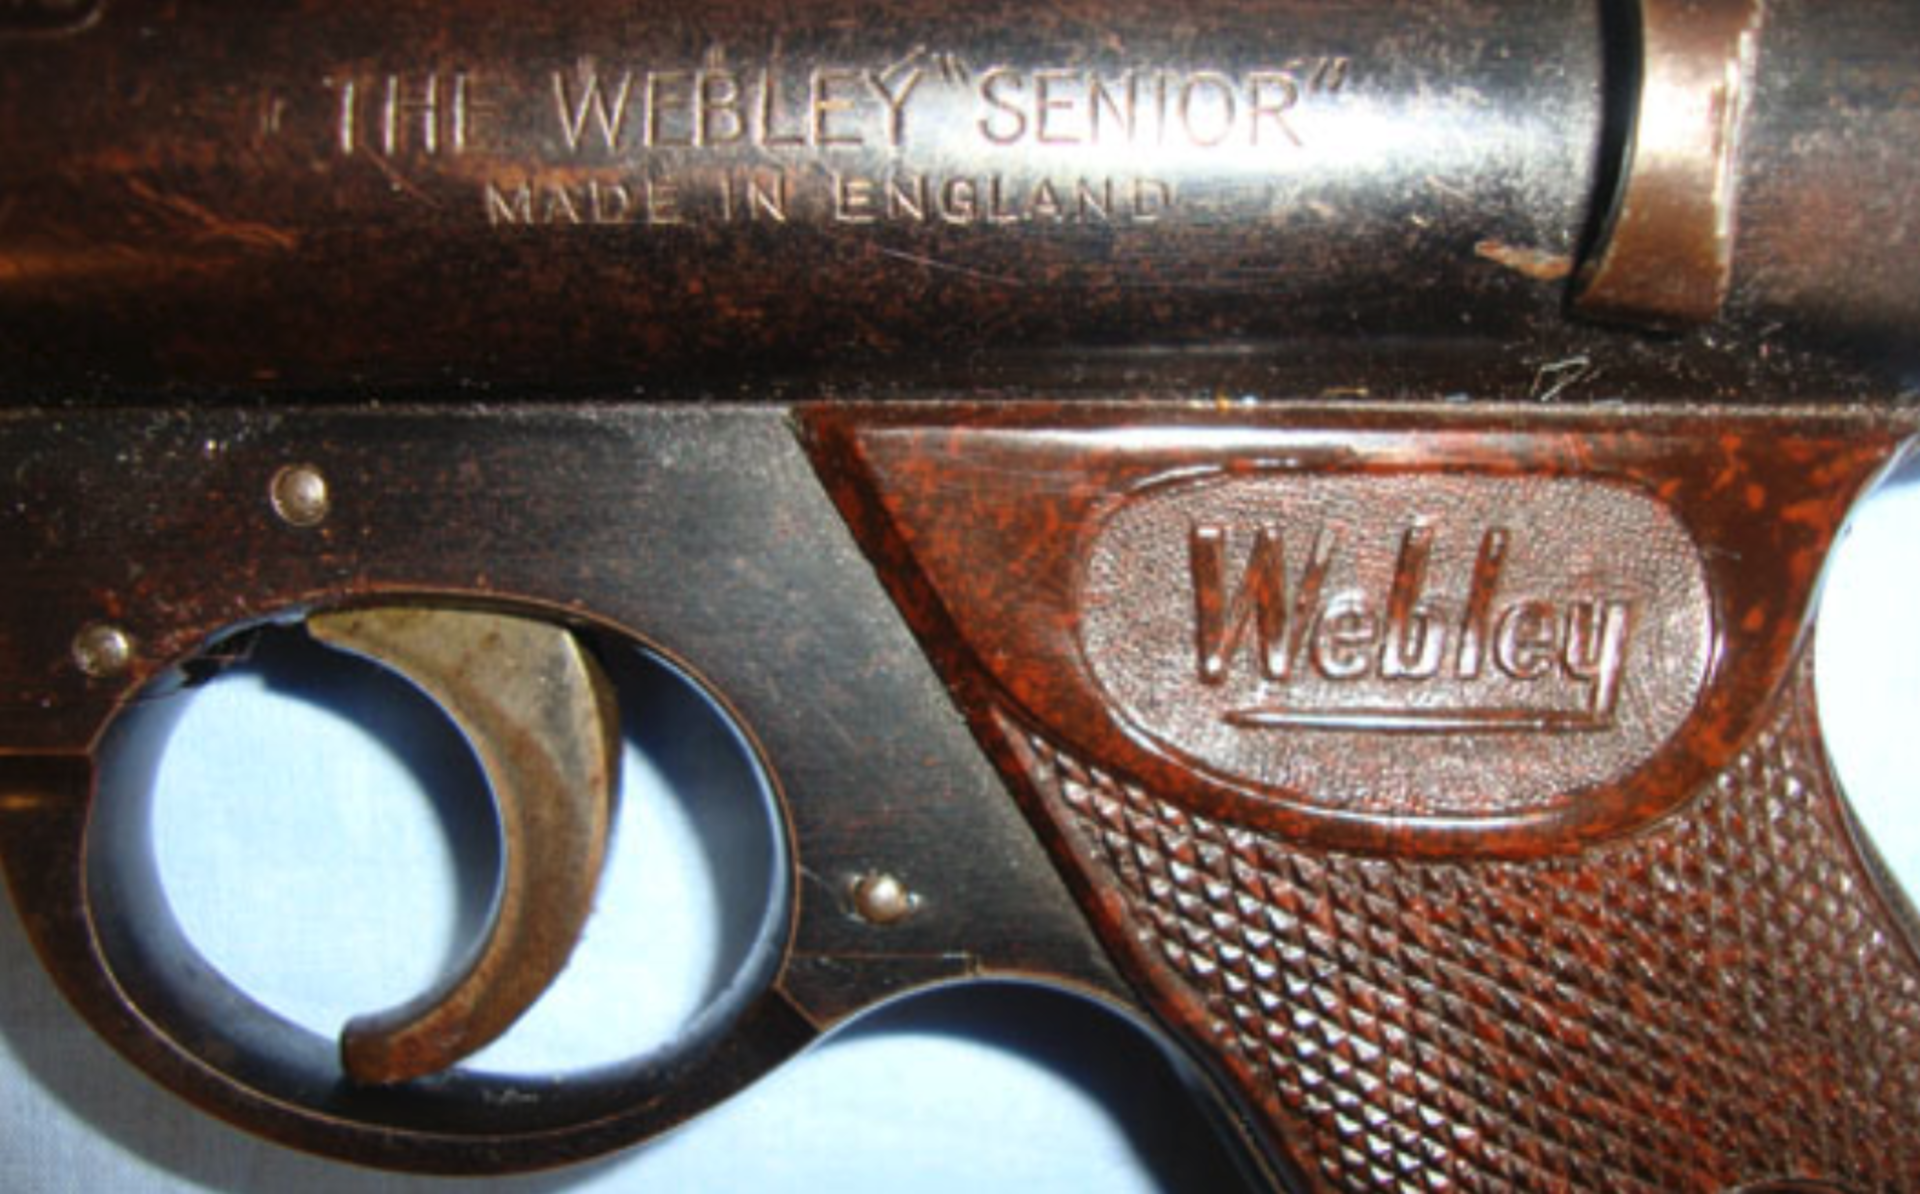 Boxed, Post 1958, Webley Senior .22 Calibre Air Pistol With Brown Grips. - Image 2 of 3